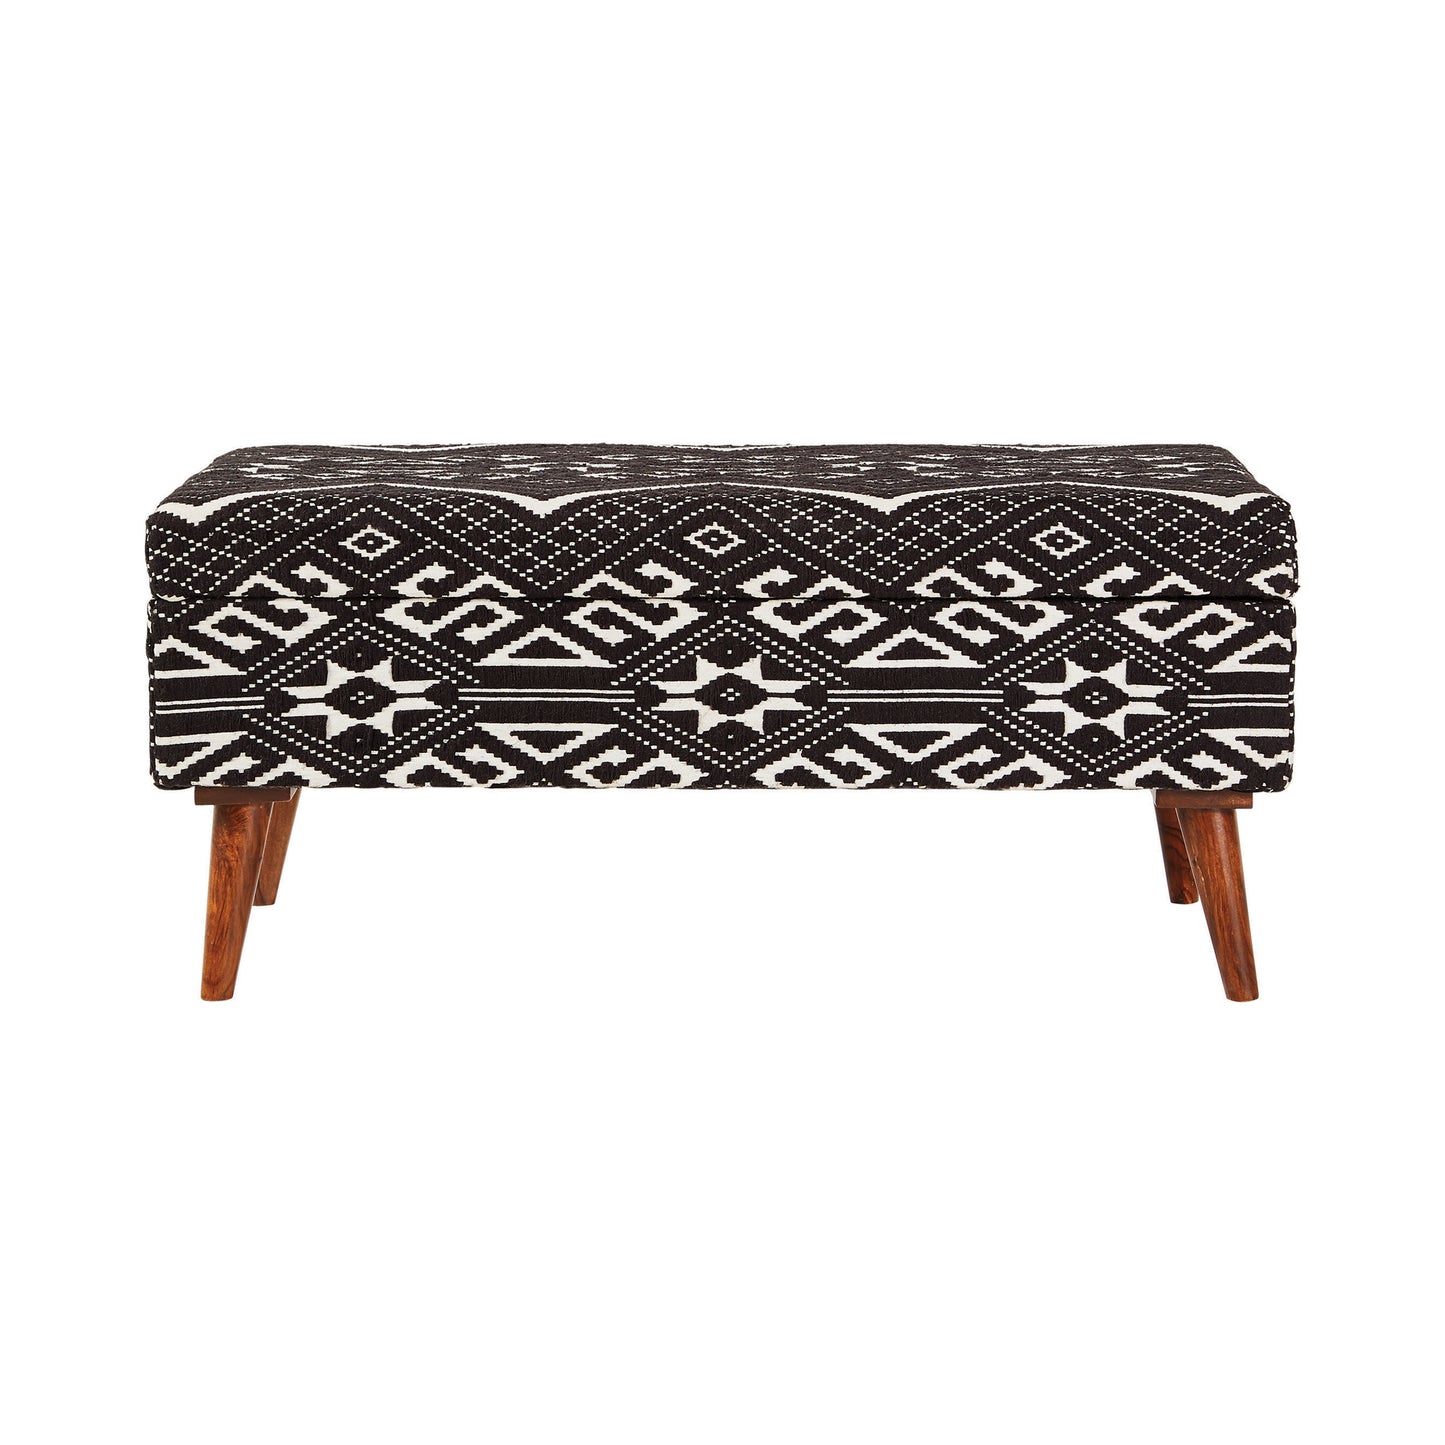 Upholstered Storage Bench Black and White